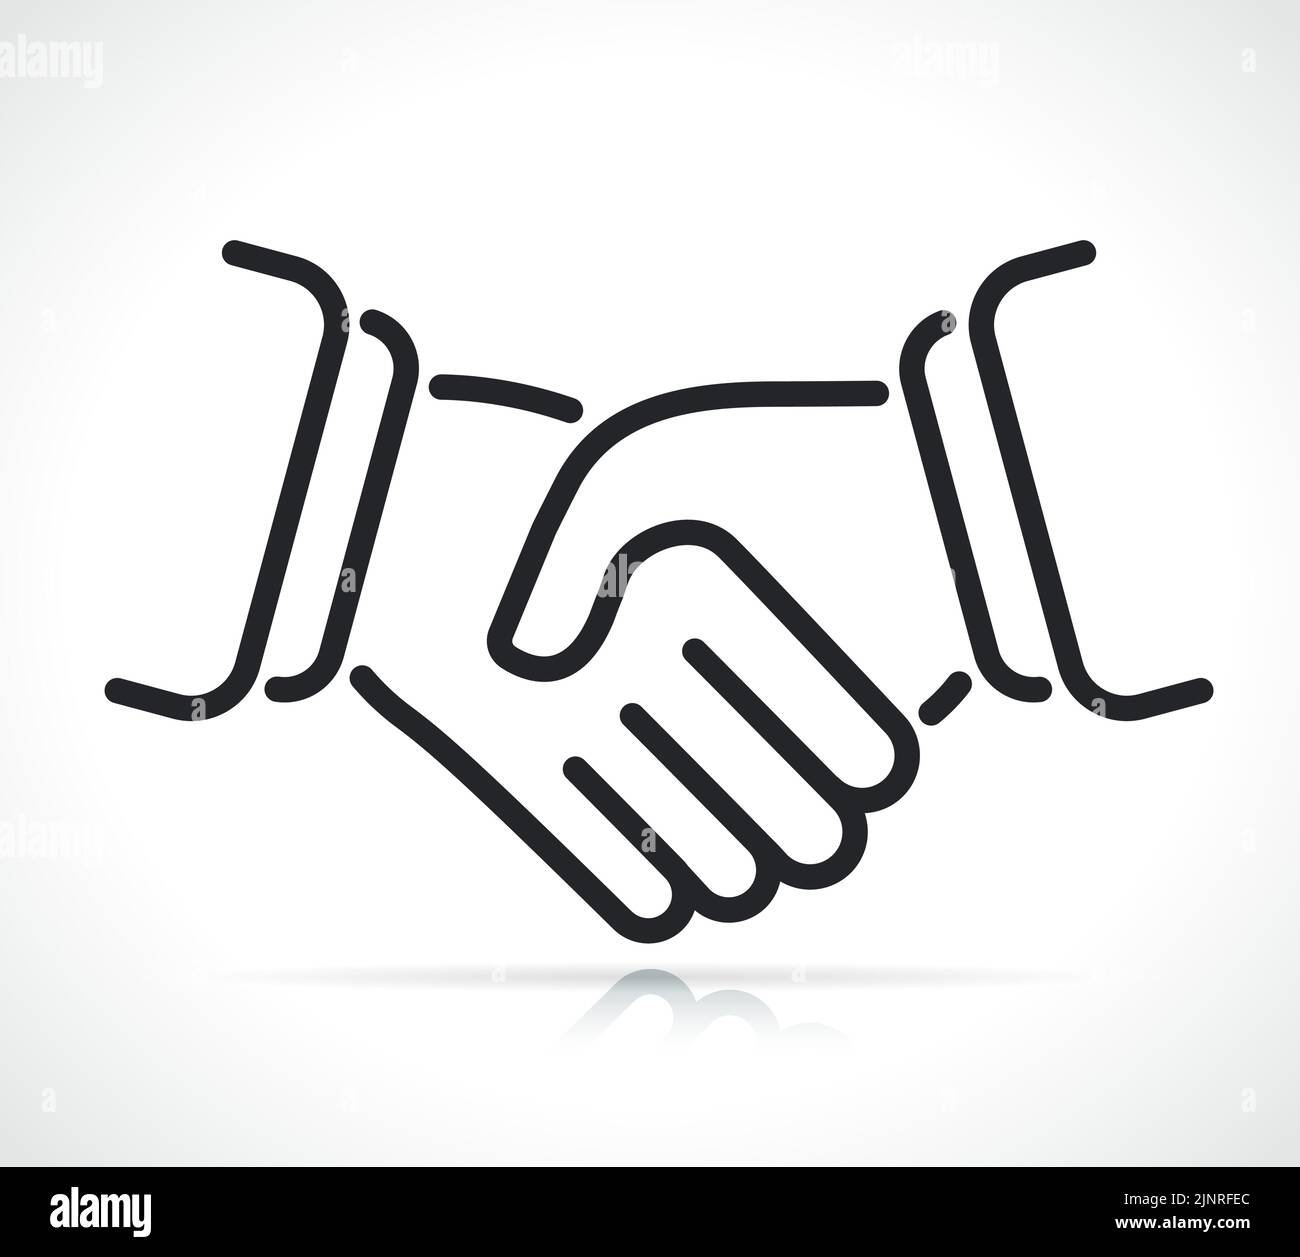 handshake or partnership thin line icon isolated Stock Vector